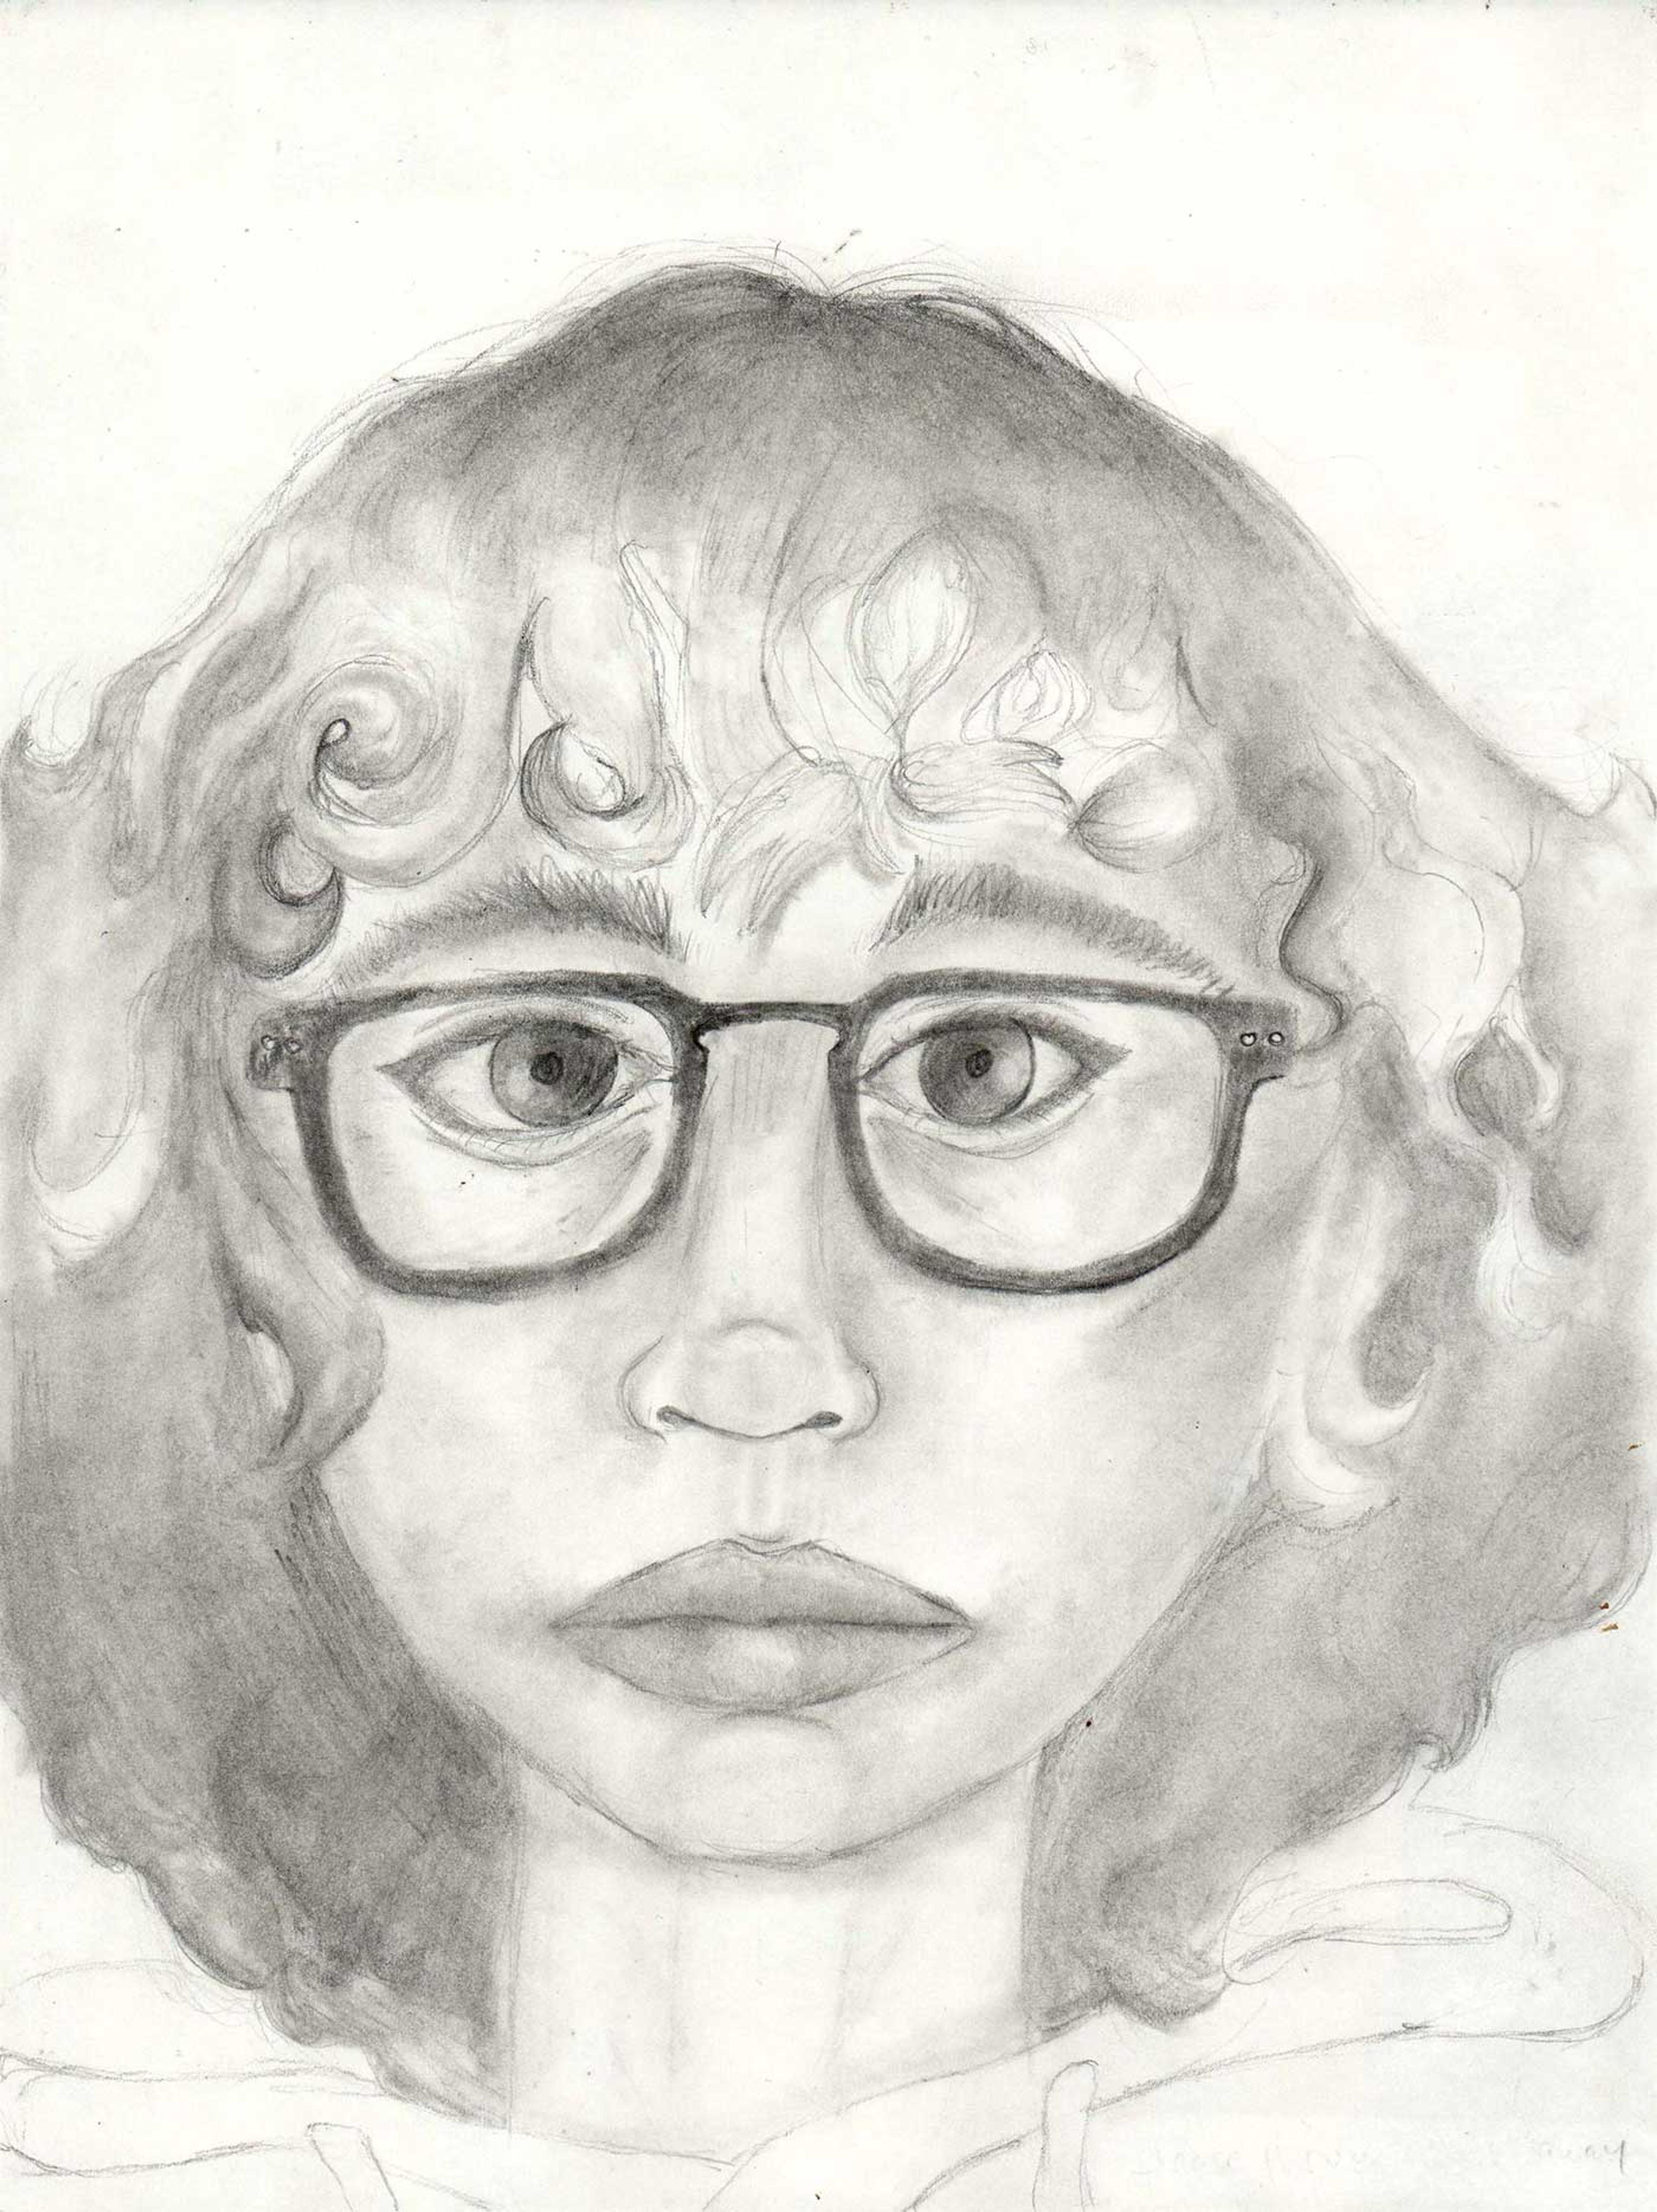 Pencil drawing of a girl wearing glasses.